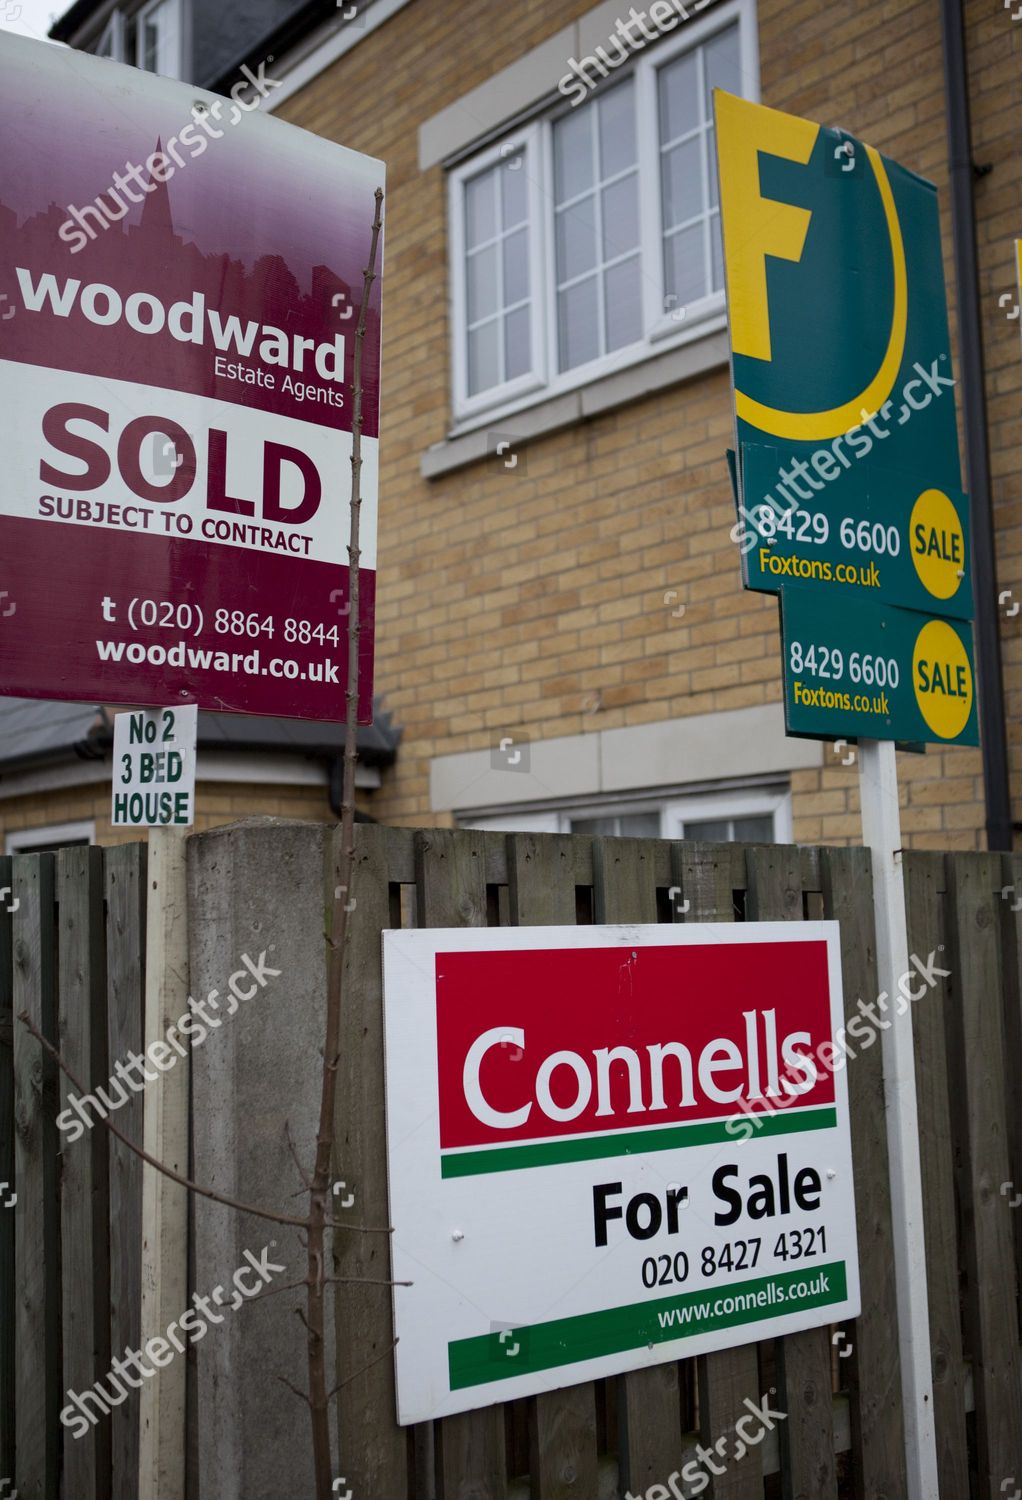 House For Sale Advertising Boards